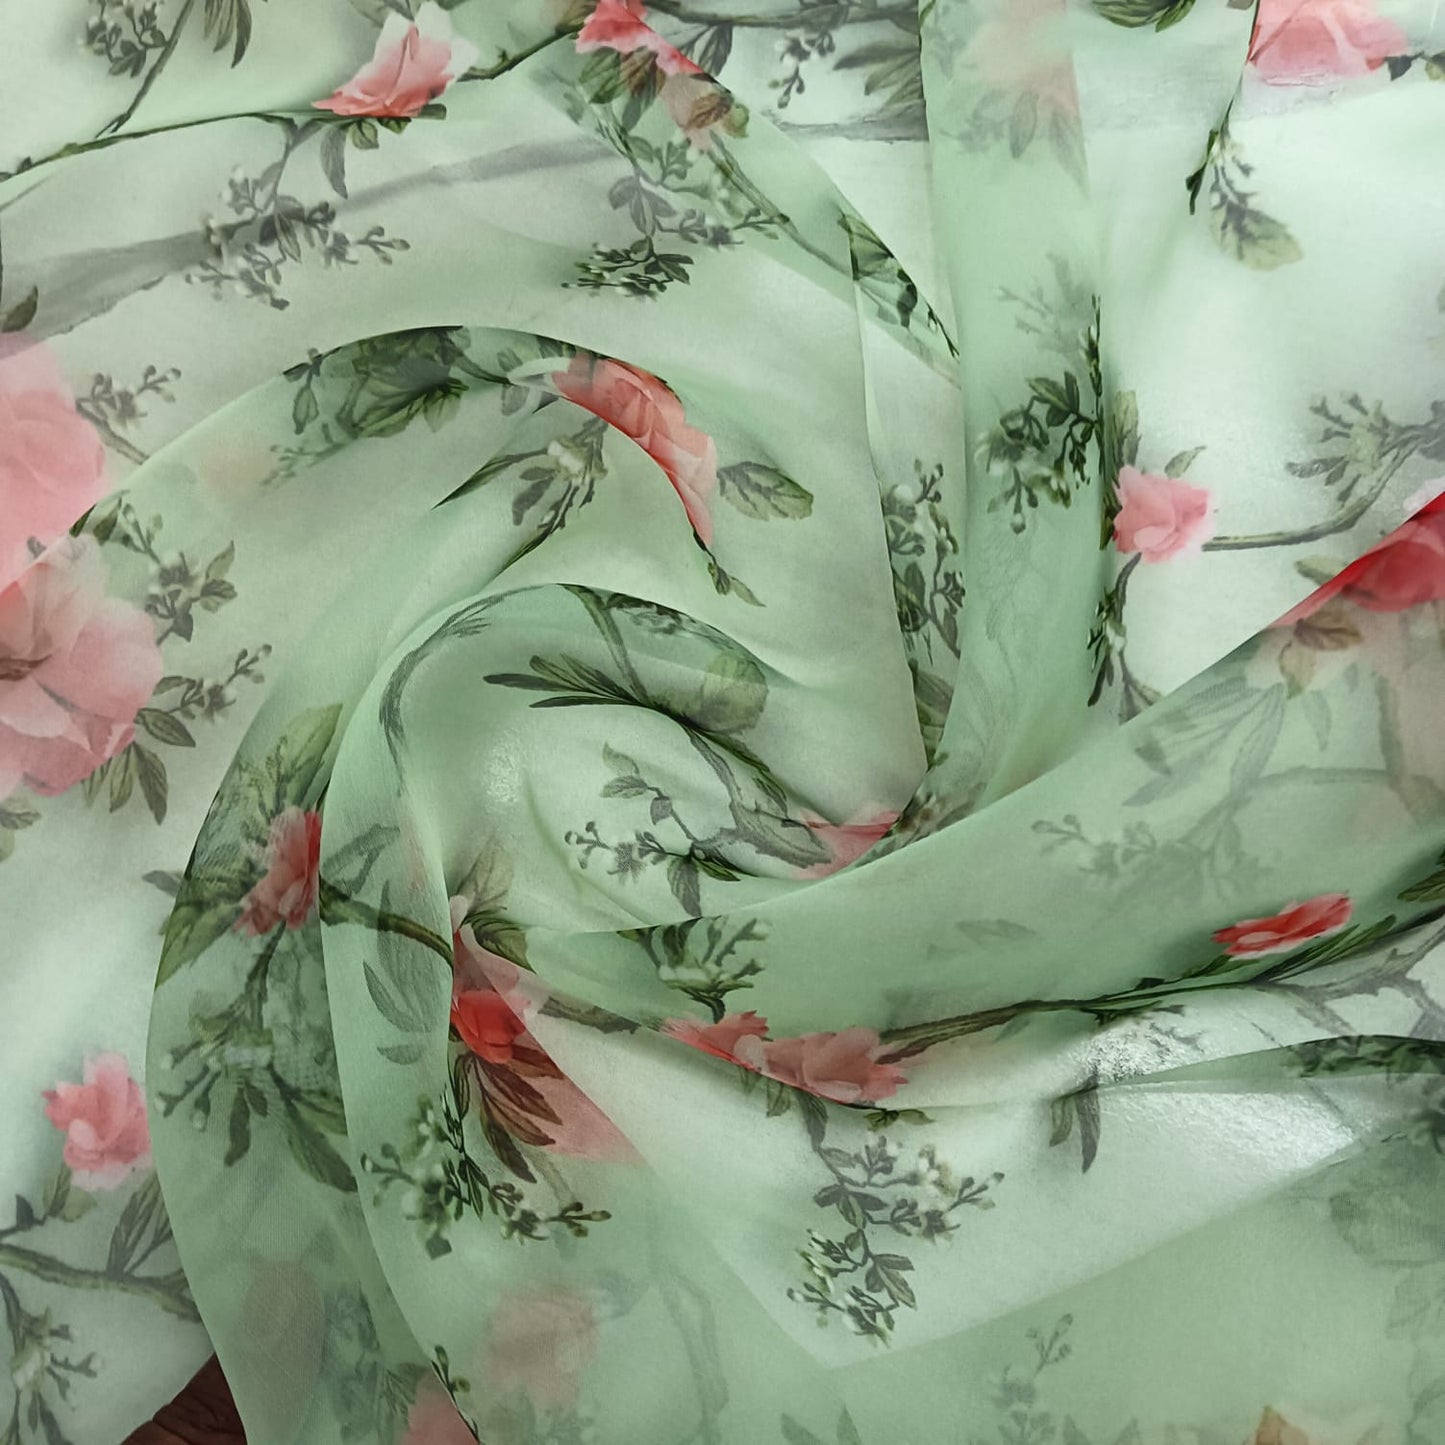 Floral Print on Organza in Green Colour Fabric